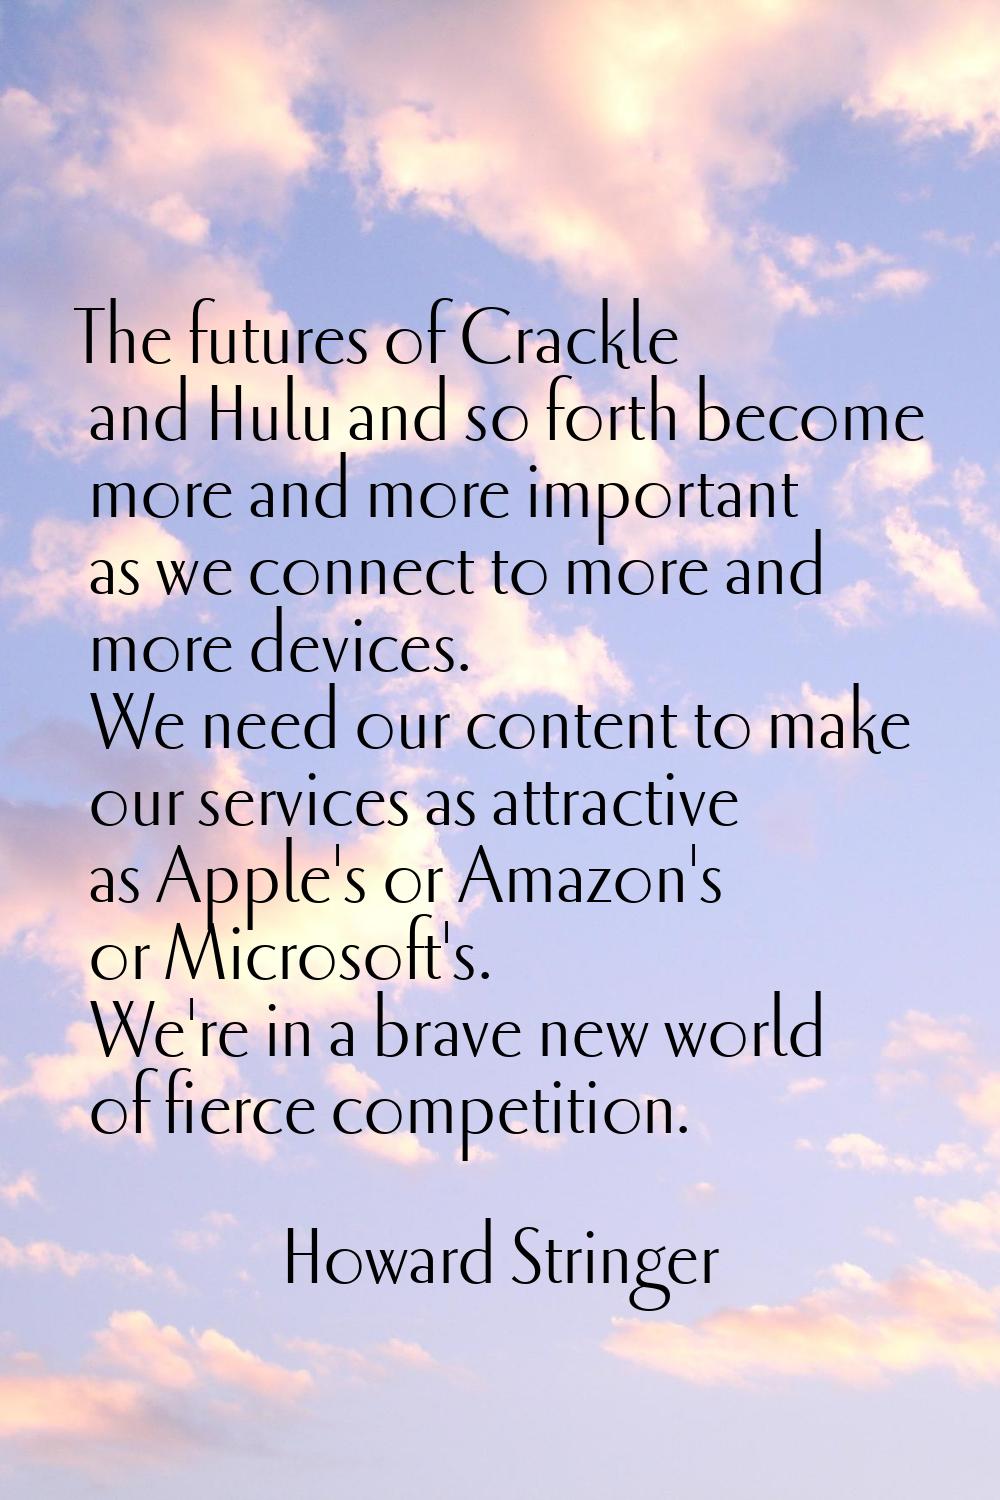 The futures of Crackle and Hulu and so forth become more and more important as we connect to more a